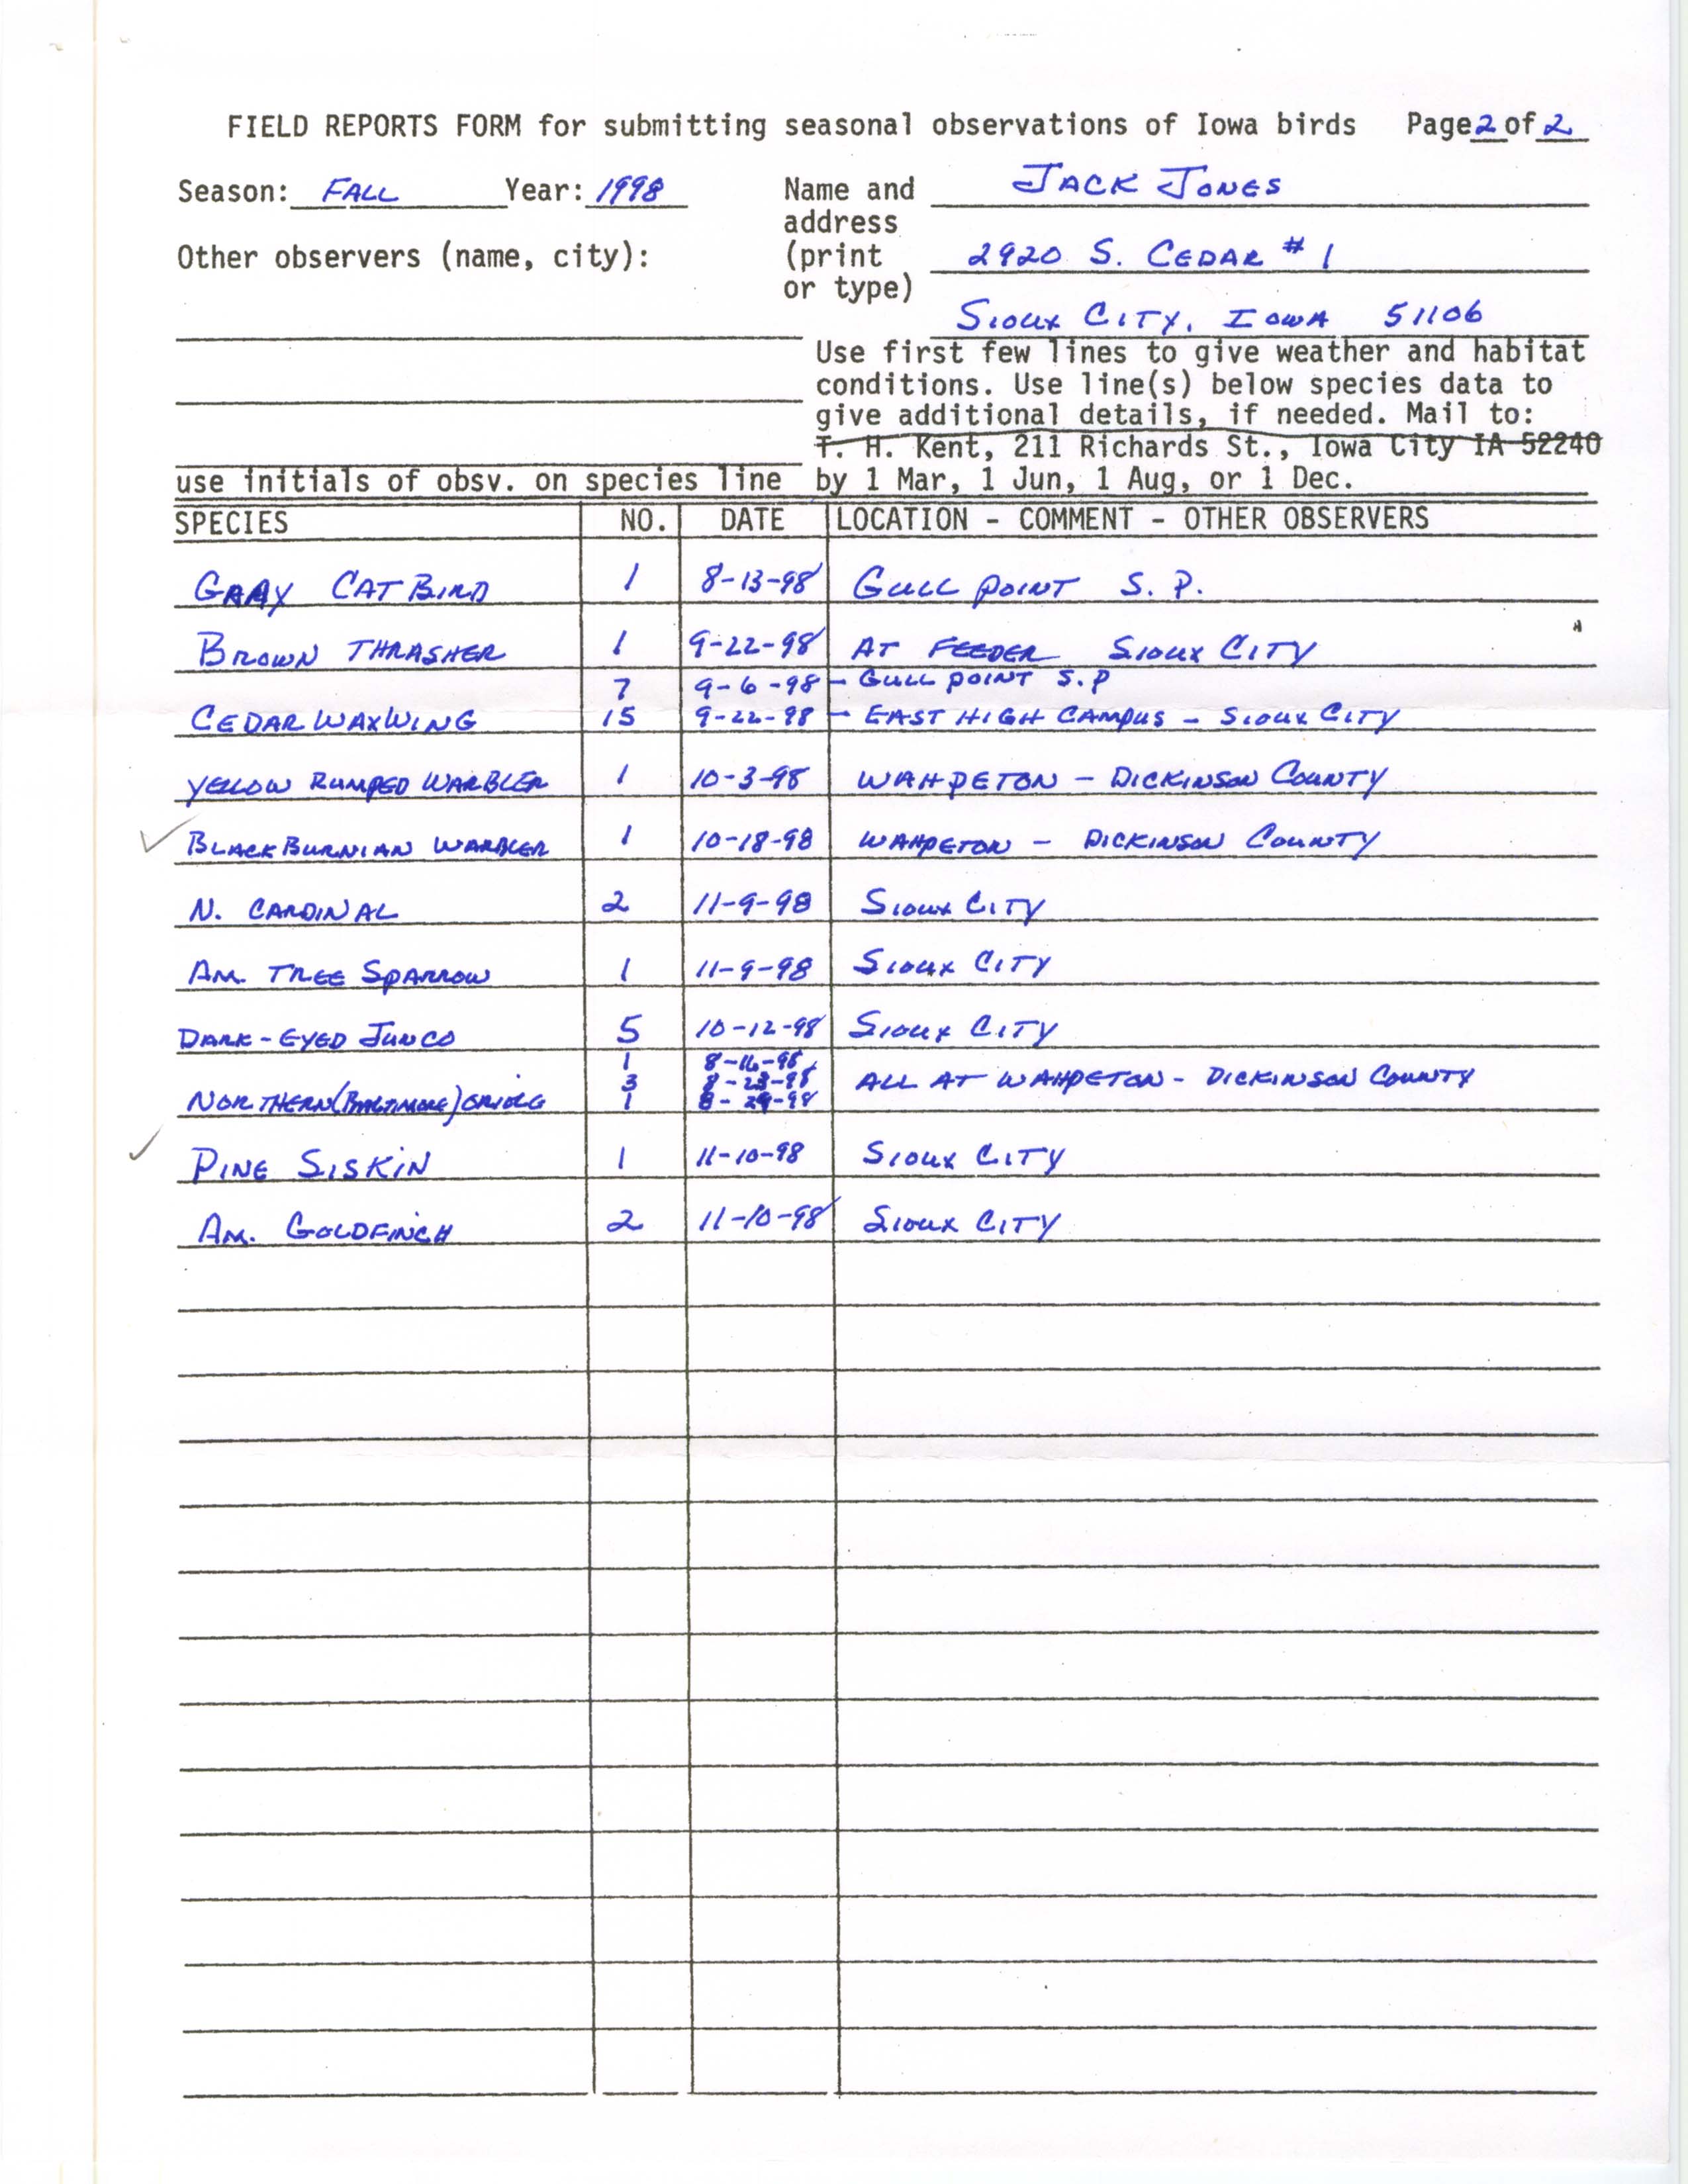 Field reports form for submitting seasonal observations of Iowa birds, Jack Jones, fall 1998